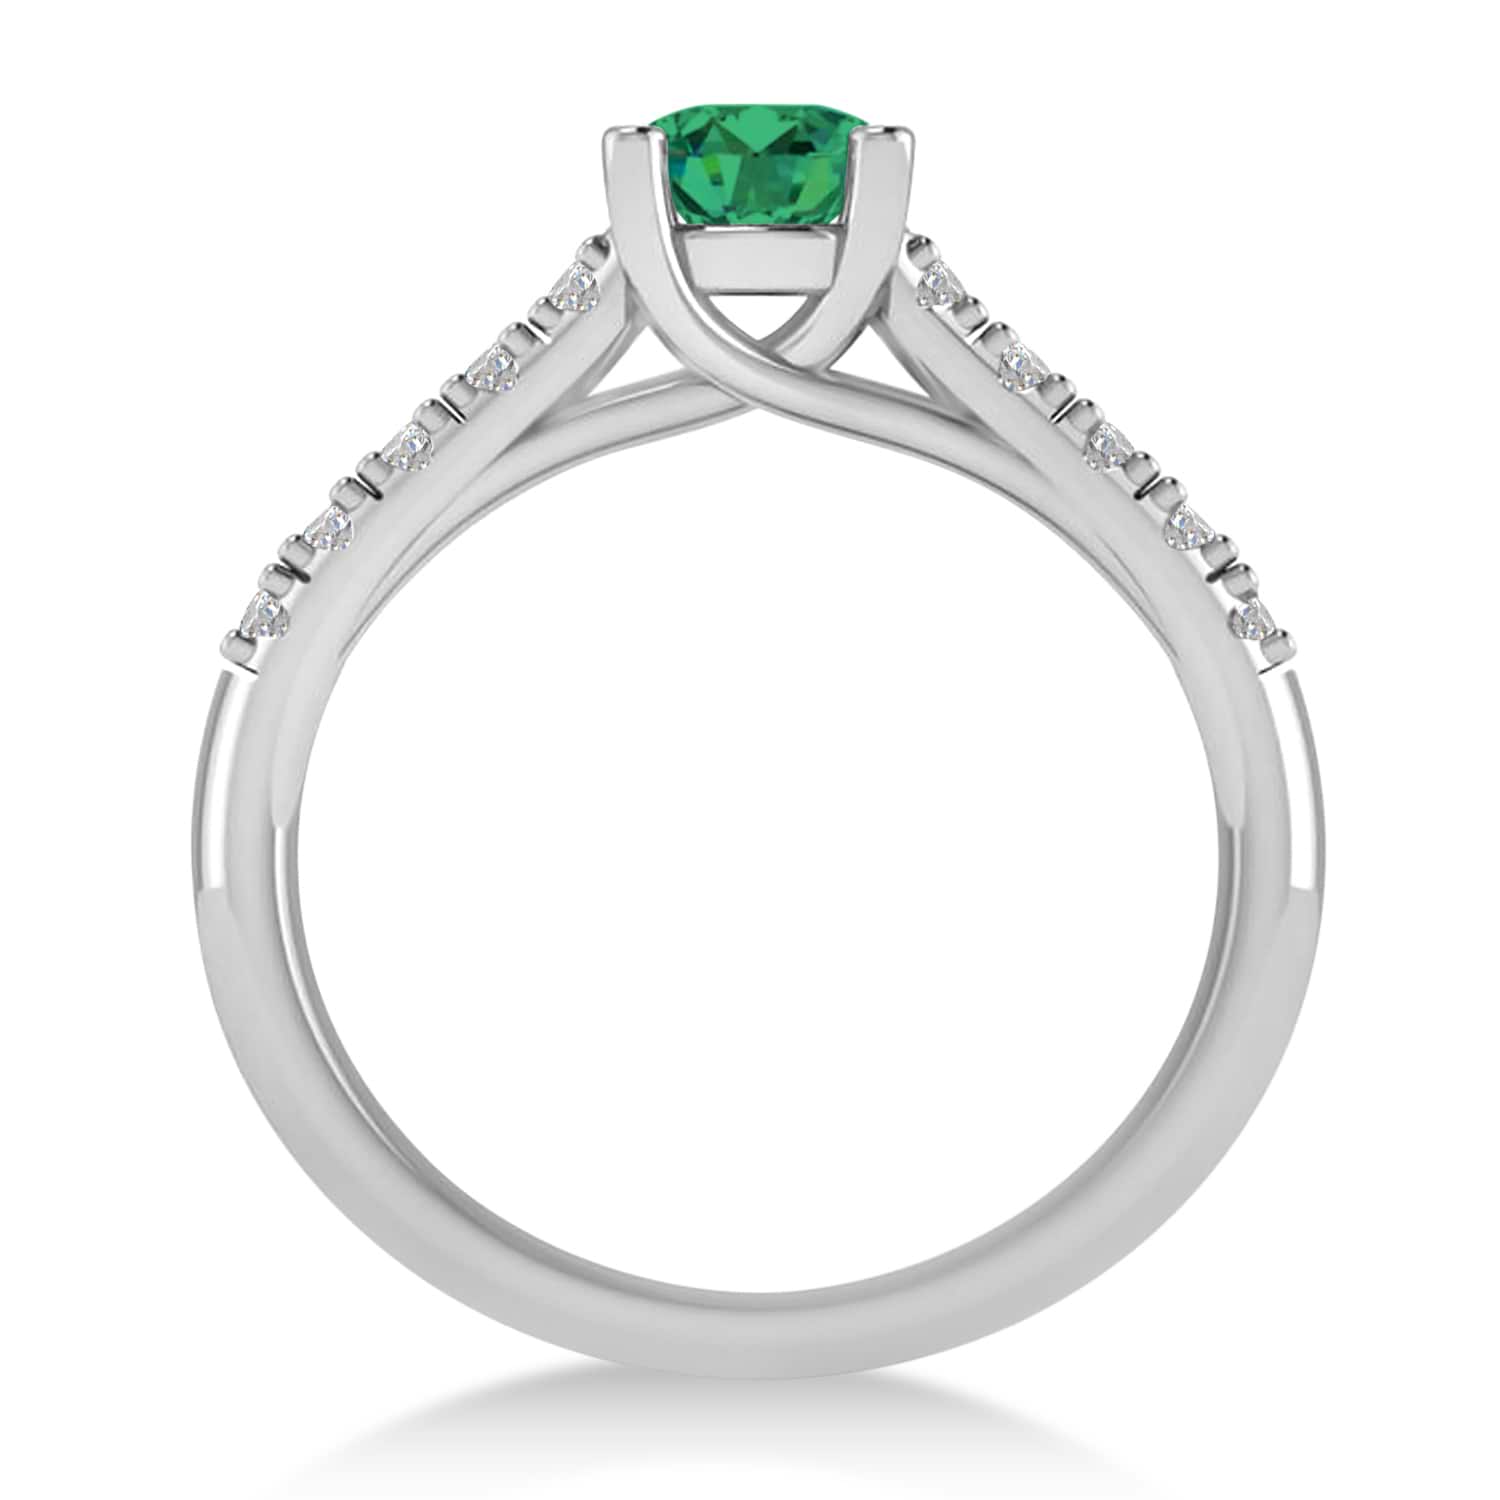 Emerald & Diamond Accented Pre-Set Engagement Ring 14k White Gold (1.05ct)